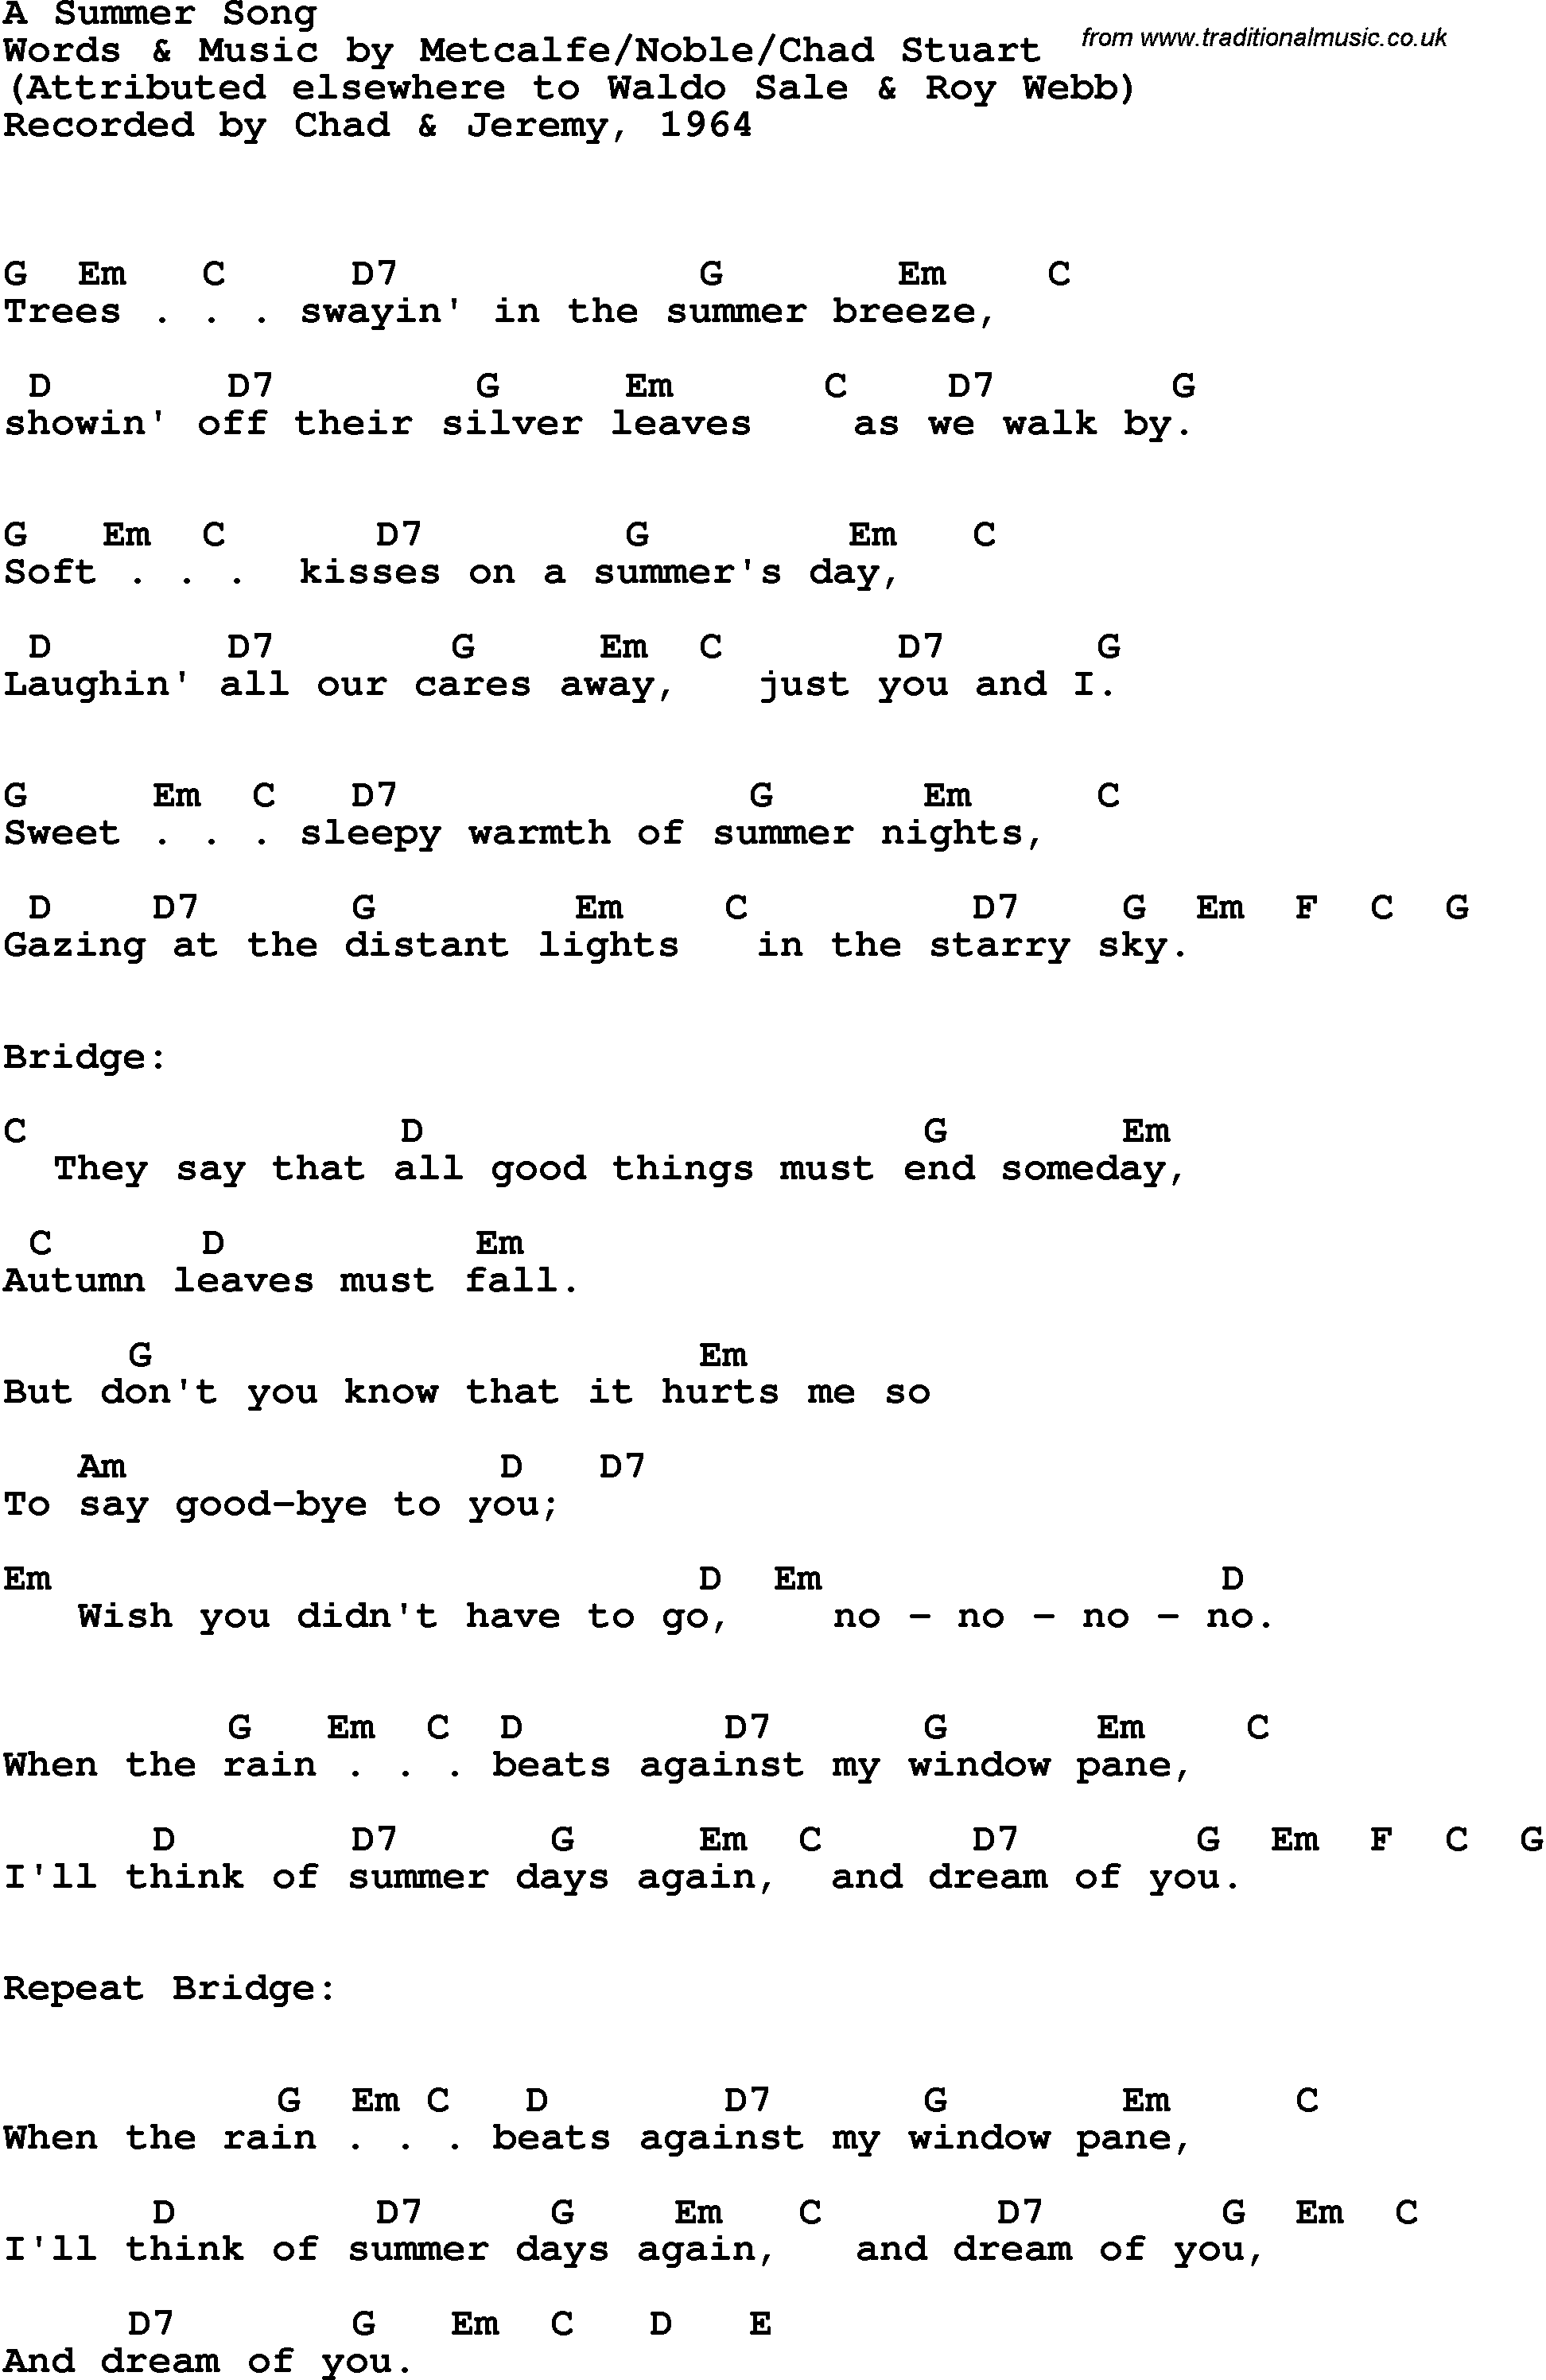 Song Lyrics with guitar chords for A Summer Song - Chad & Jeremy, 1964